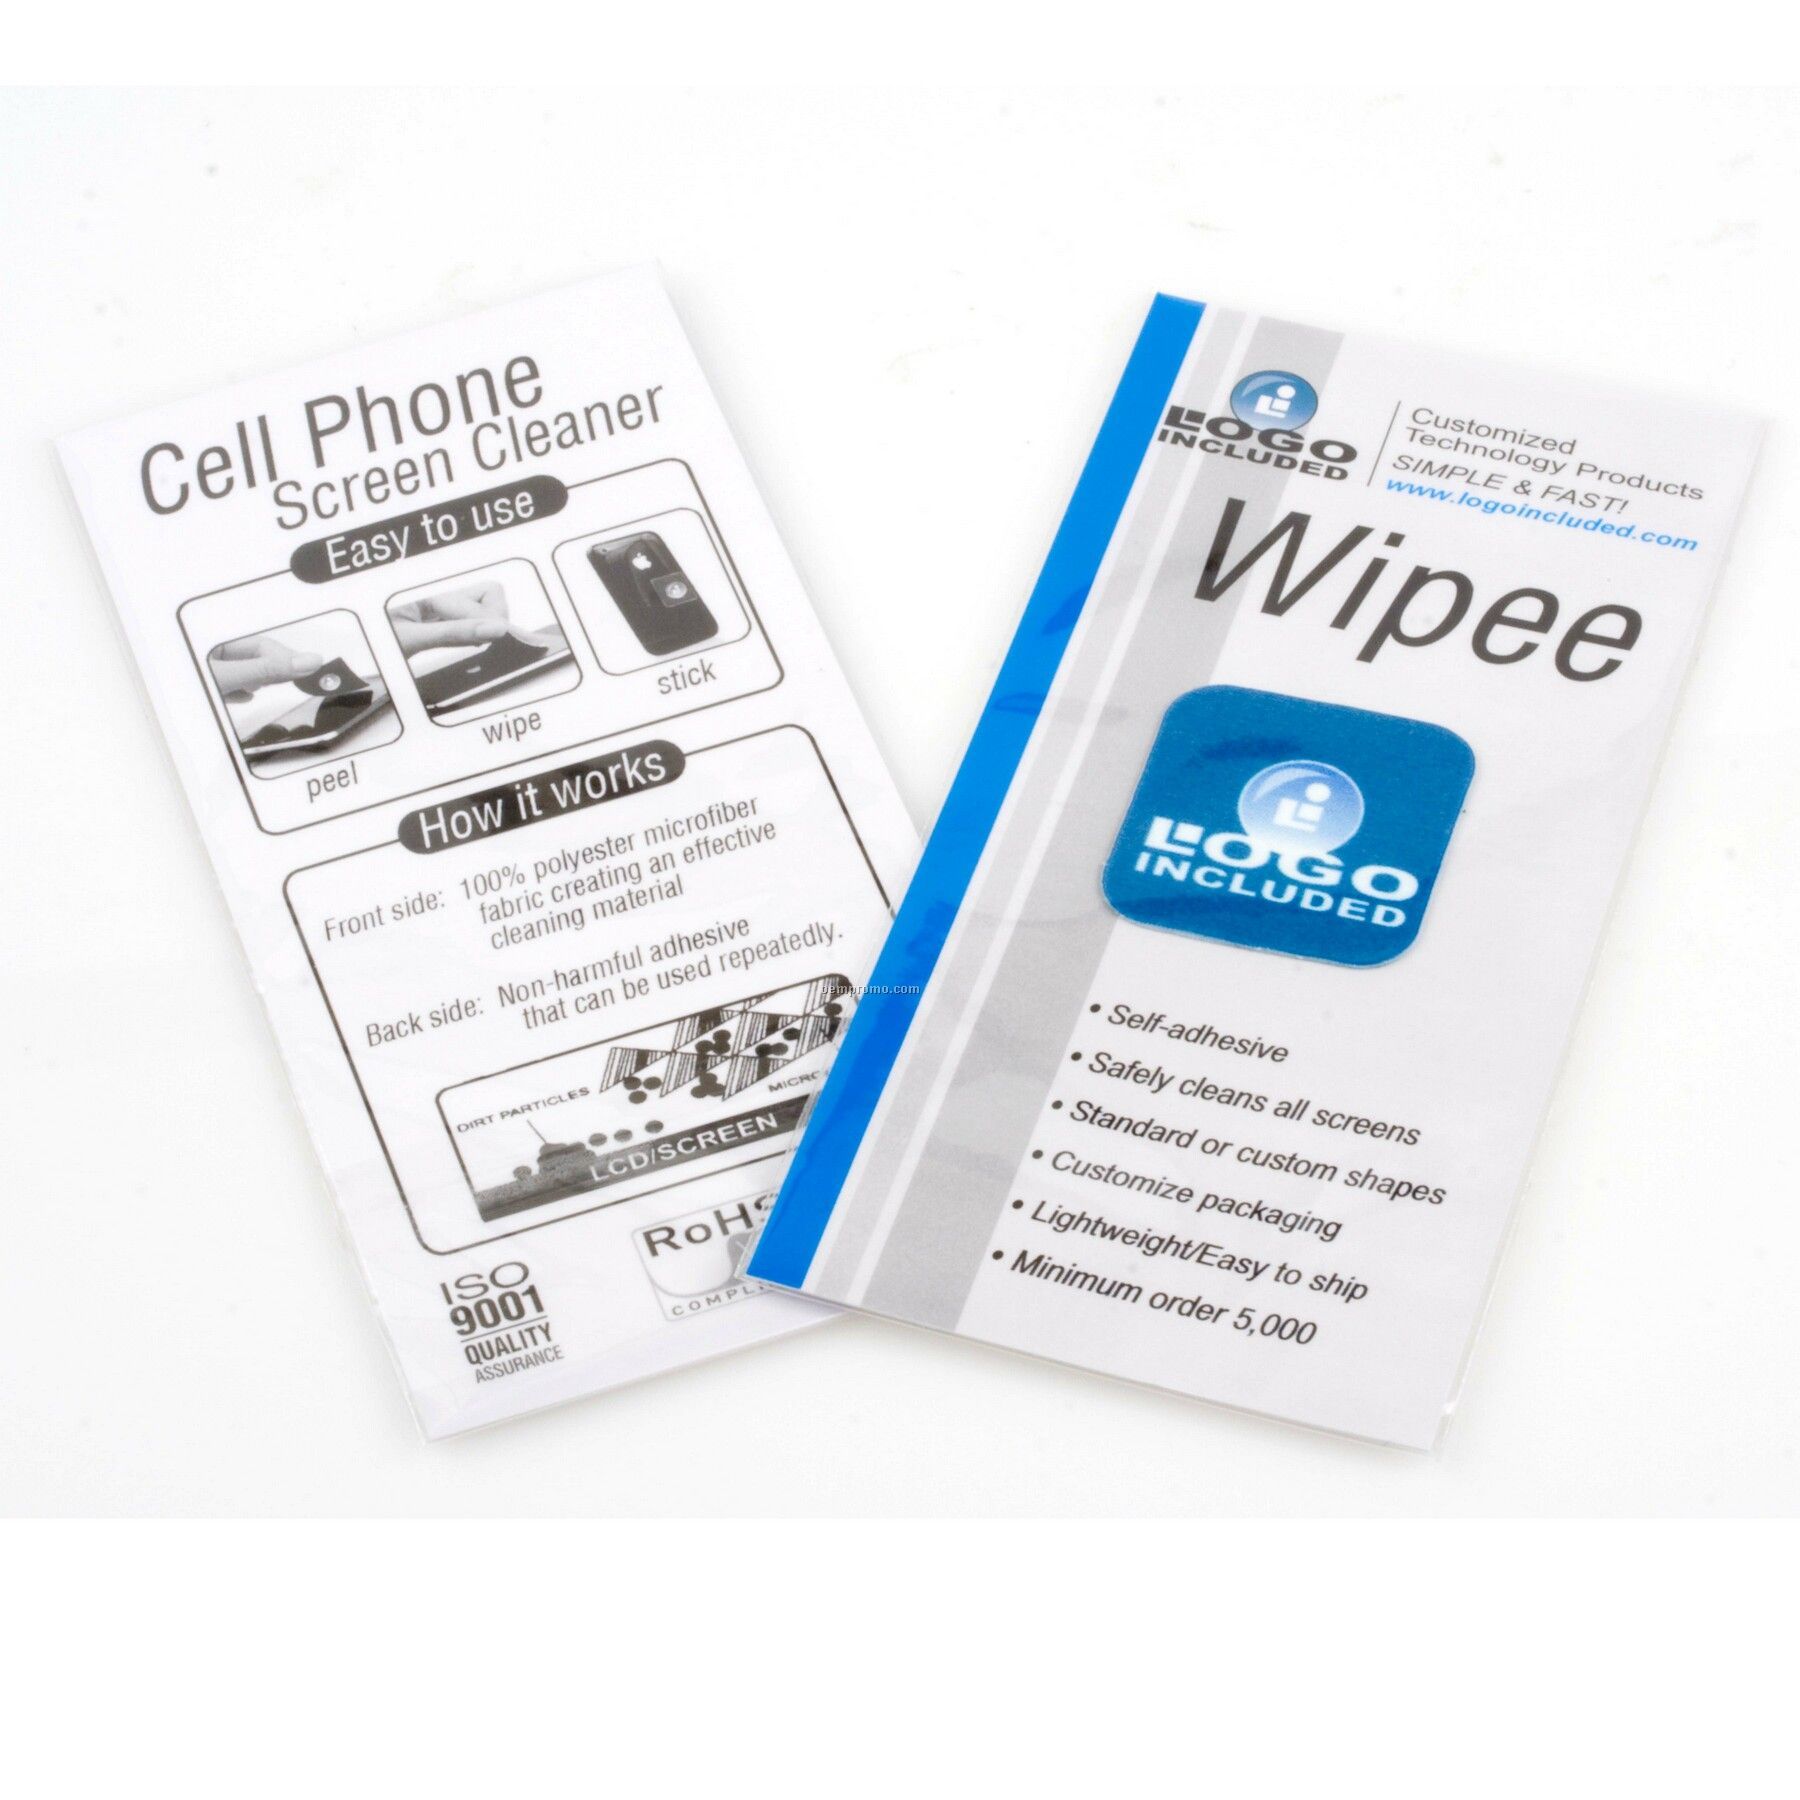 Wipee Cell Phone Cleaner